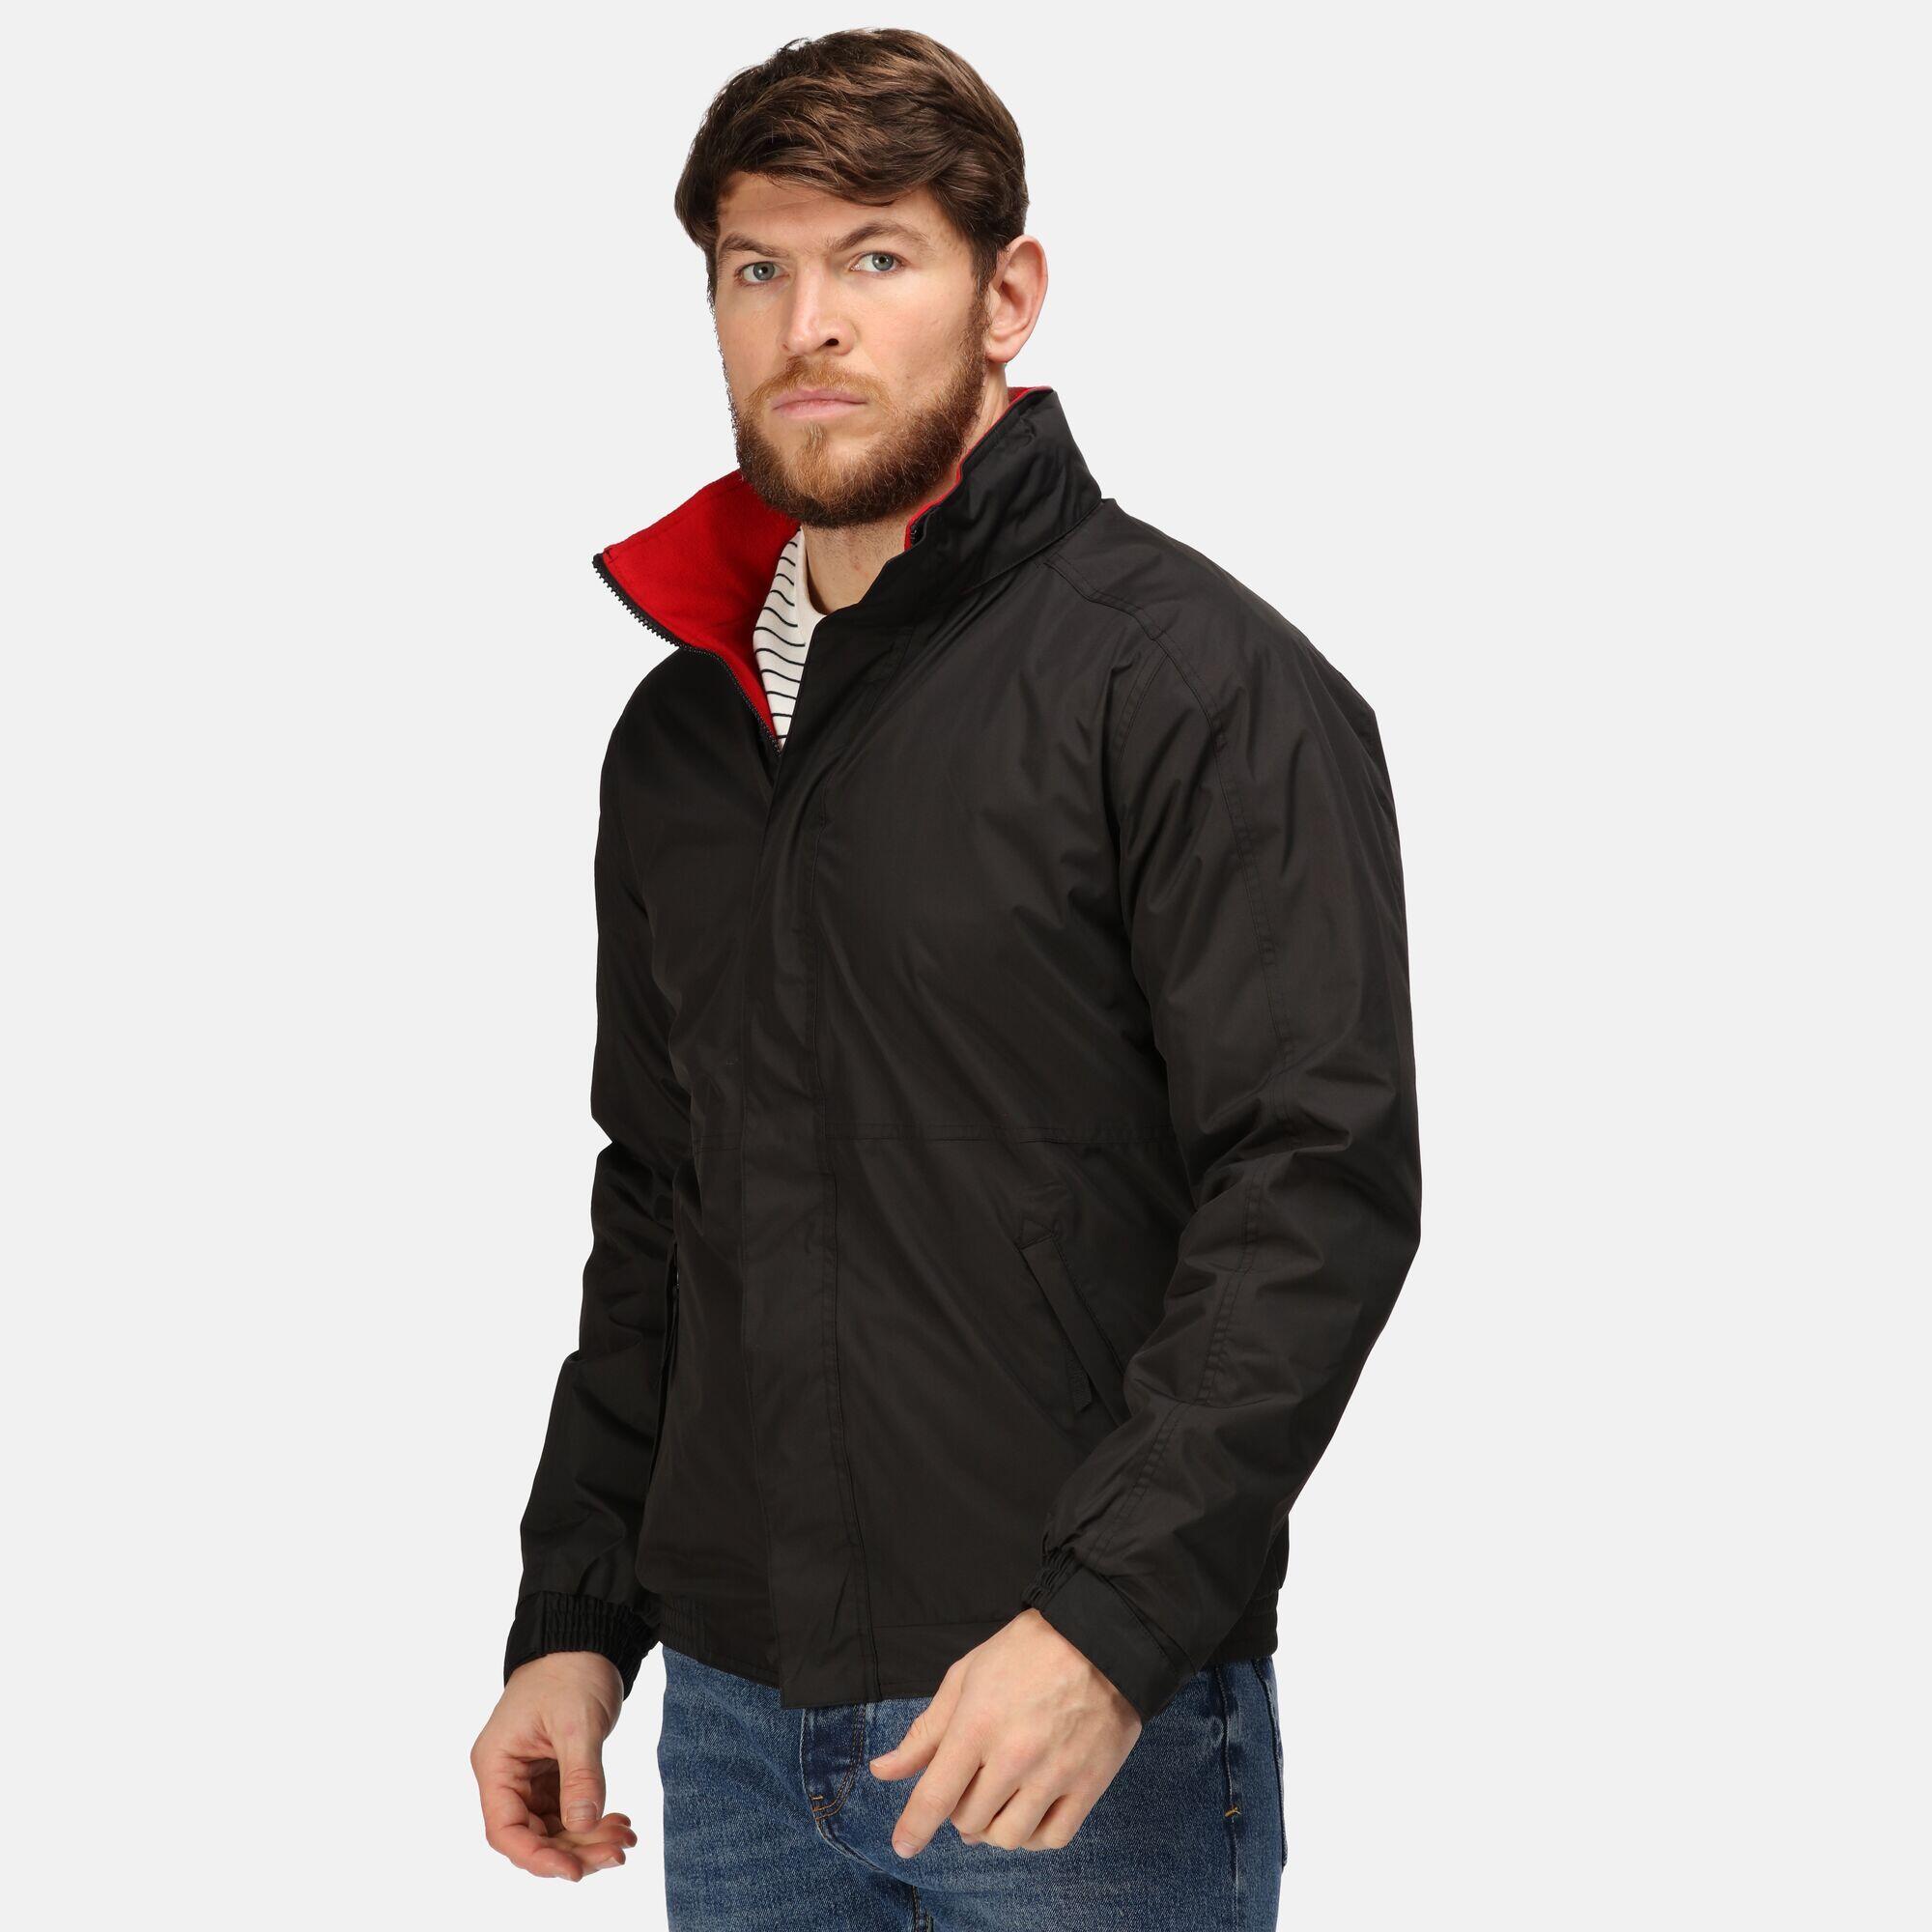 Dover Waterproof Windproof Jacket (ThermoGuard Insulation) (Black/Classic Red) 4/5